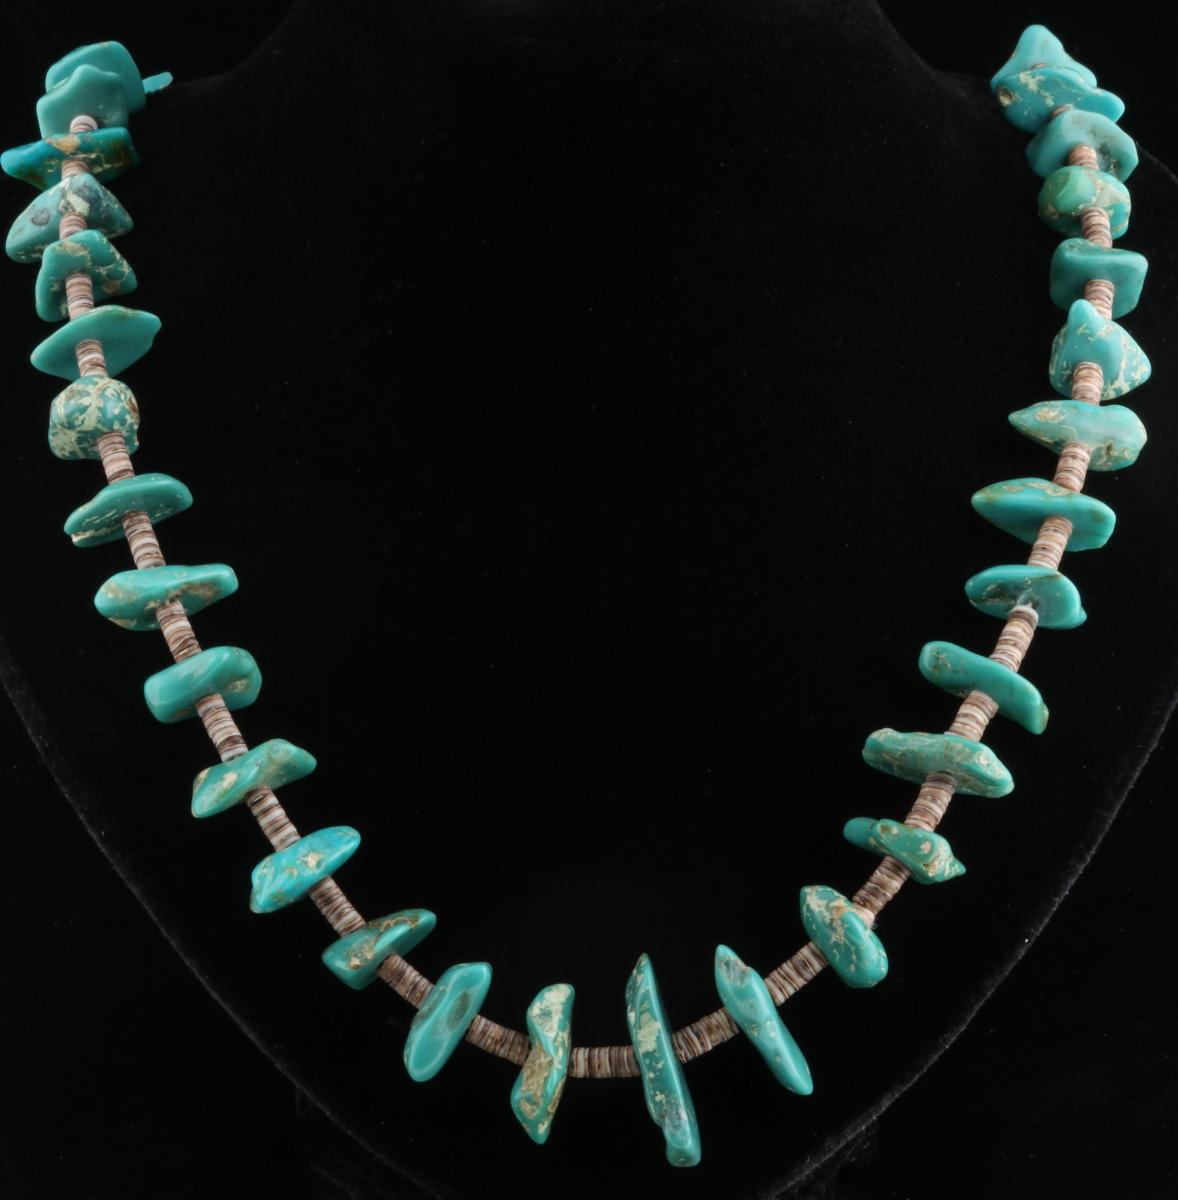 A SOUTHWEST TURQUOISE NUGGET NECKLACE